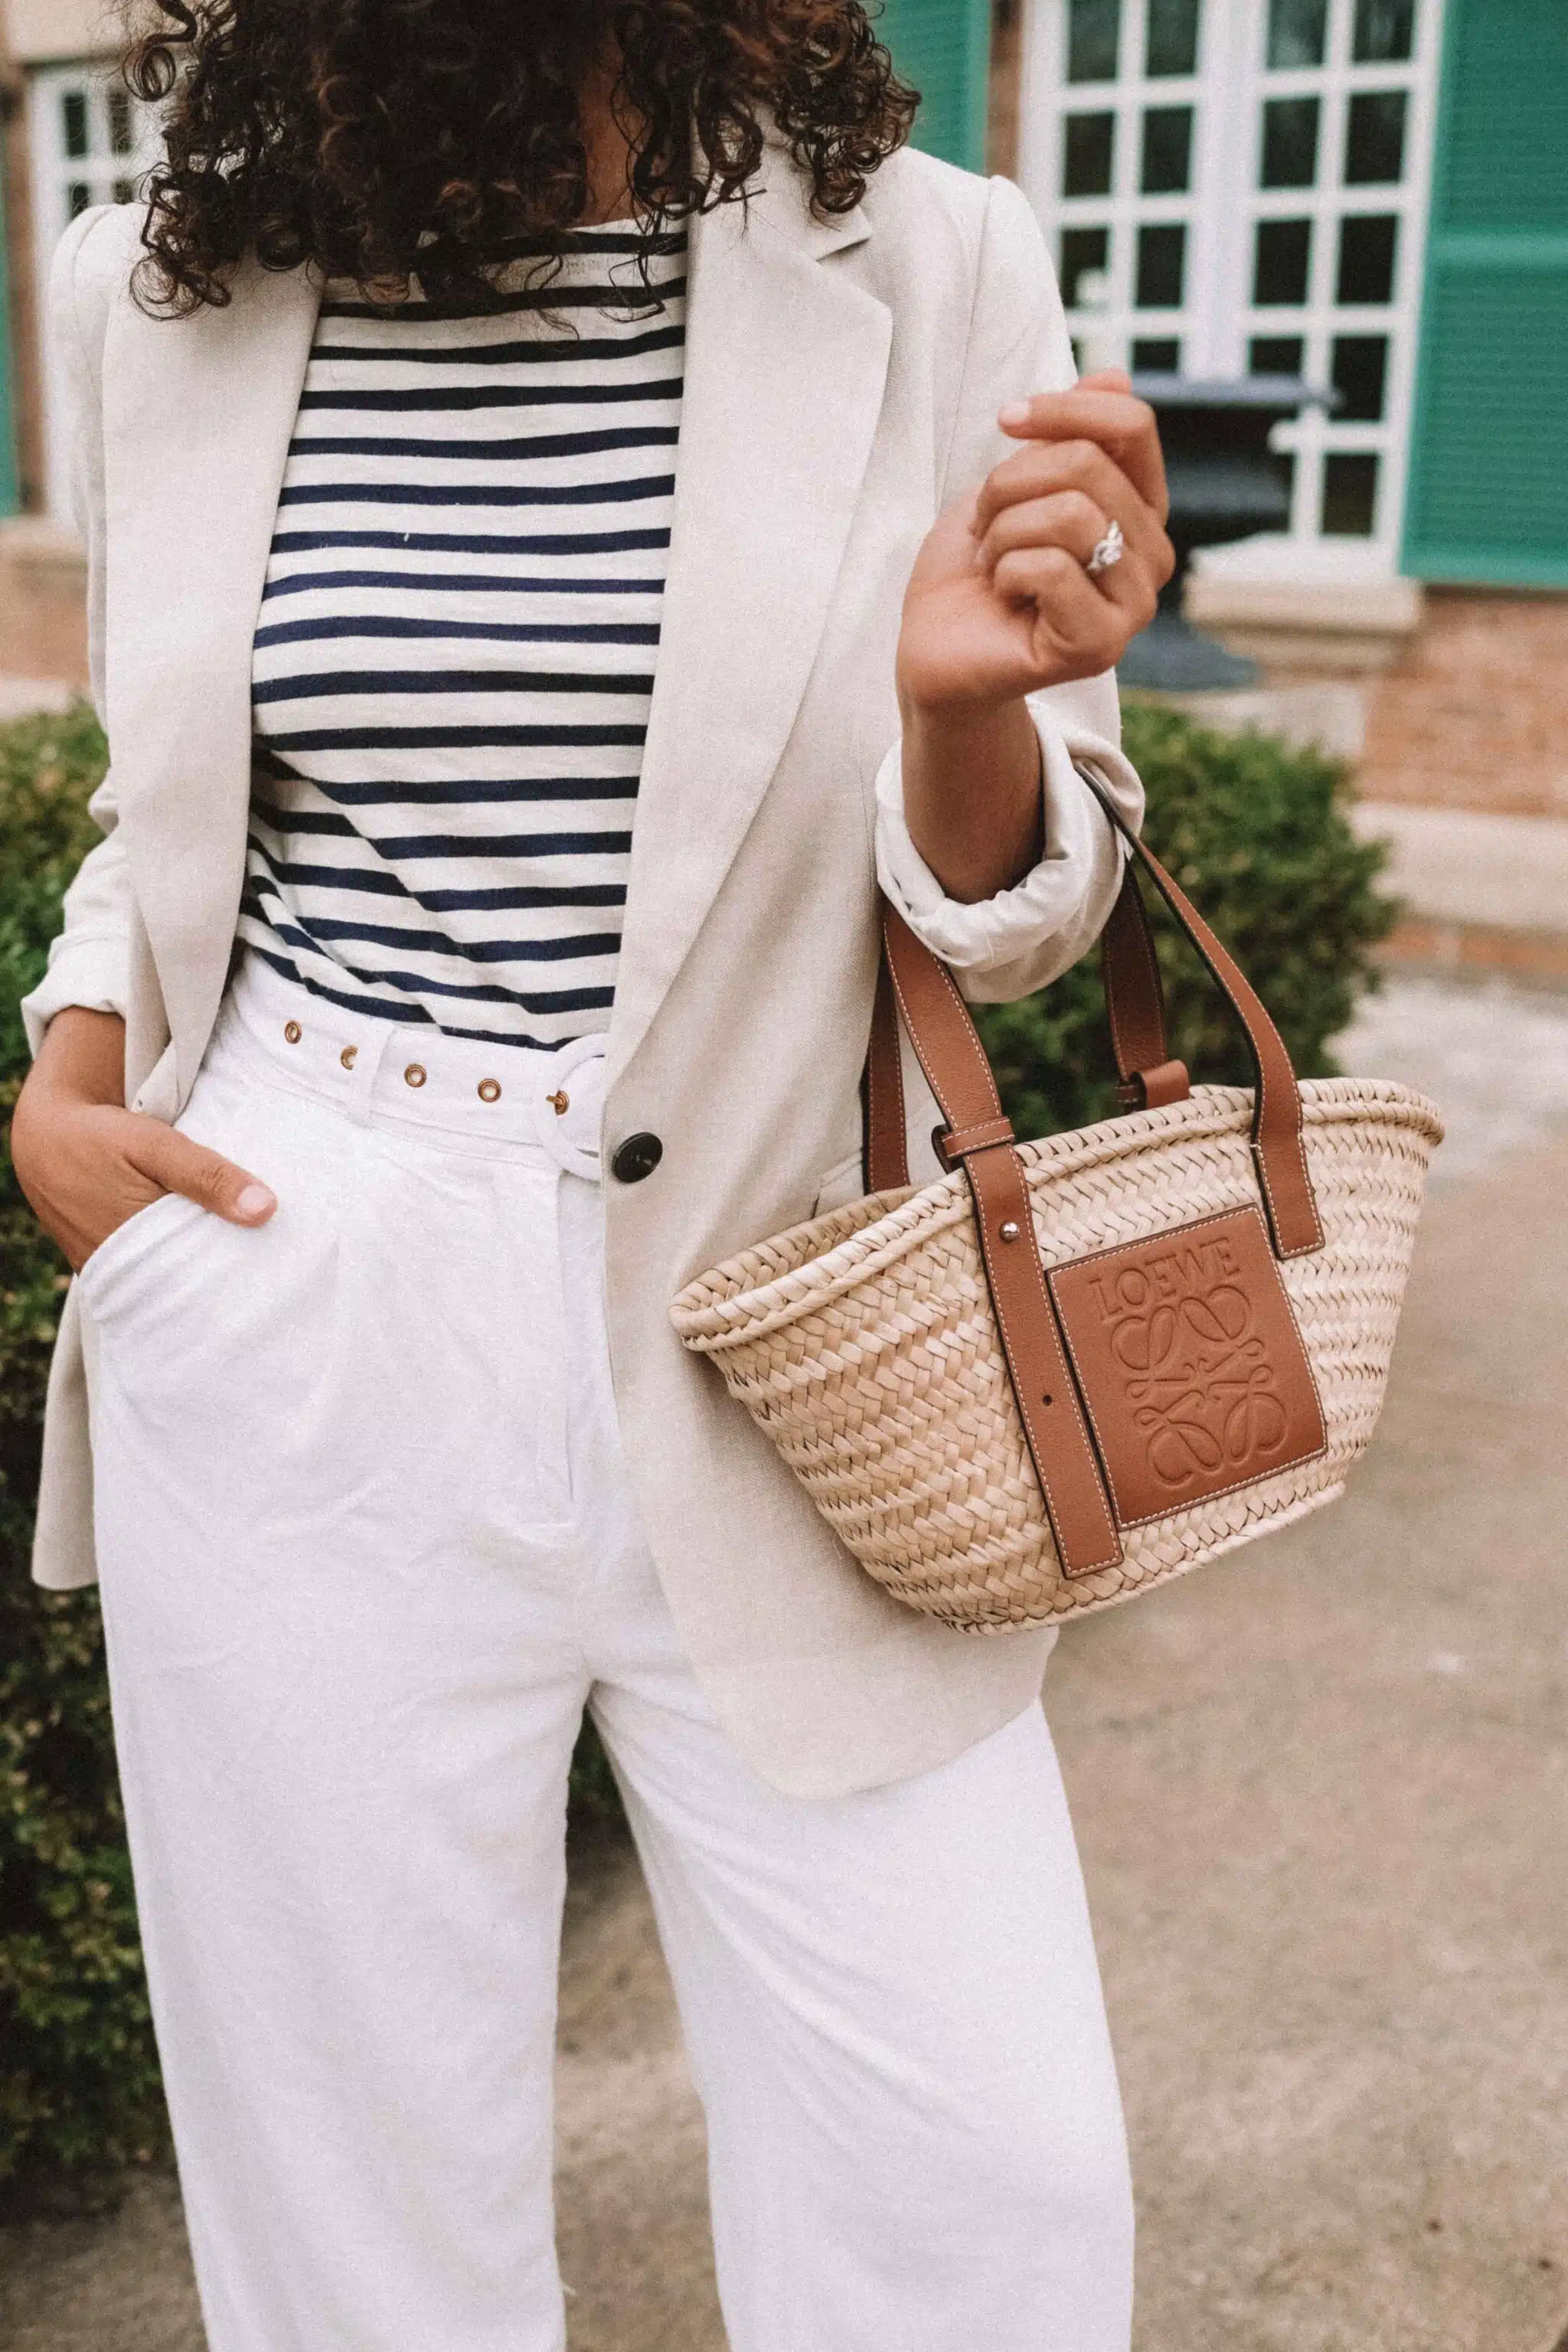 white linen pants outfit